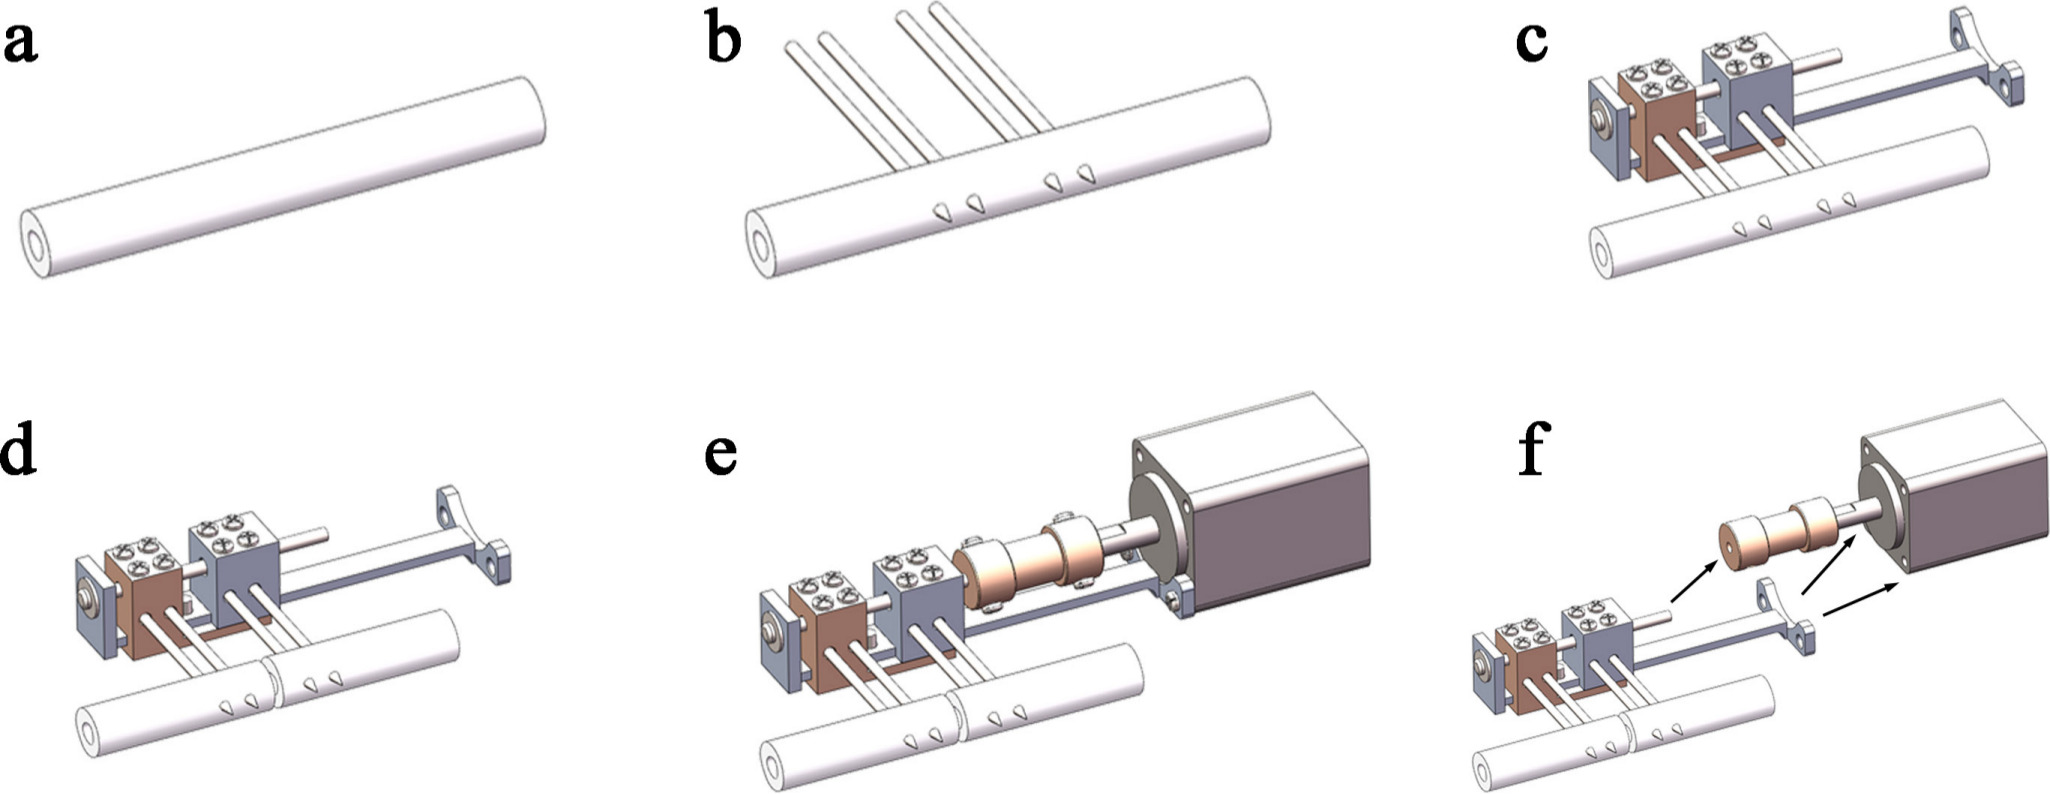 Fig. 3 
            The schematic diagrams of surgical techniques: a) exposing the femur; b) inserting Kirschner wires after pilot holes were made on the femur; c) installing external fixator; d) making a 2 mm fracture gap before surgical suturing; e) inserting motor after two-week postoperative recovery, then running the stepping motor to apply micromotion to the fracture; and f) dismantling the stepping motor and the coupling after each micromotion application.
          